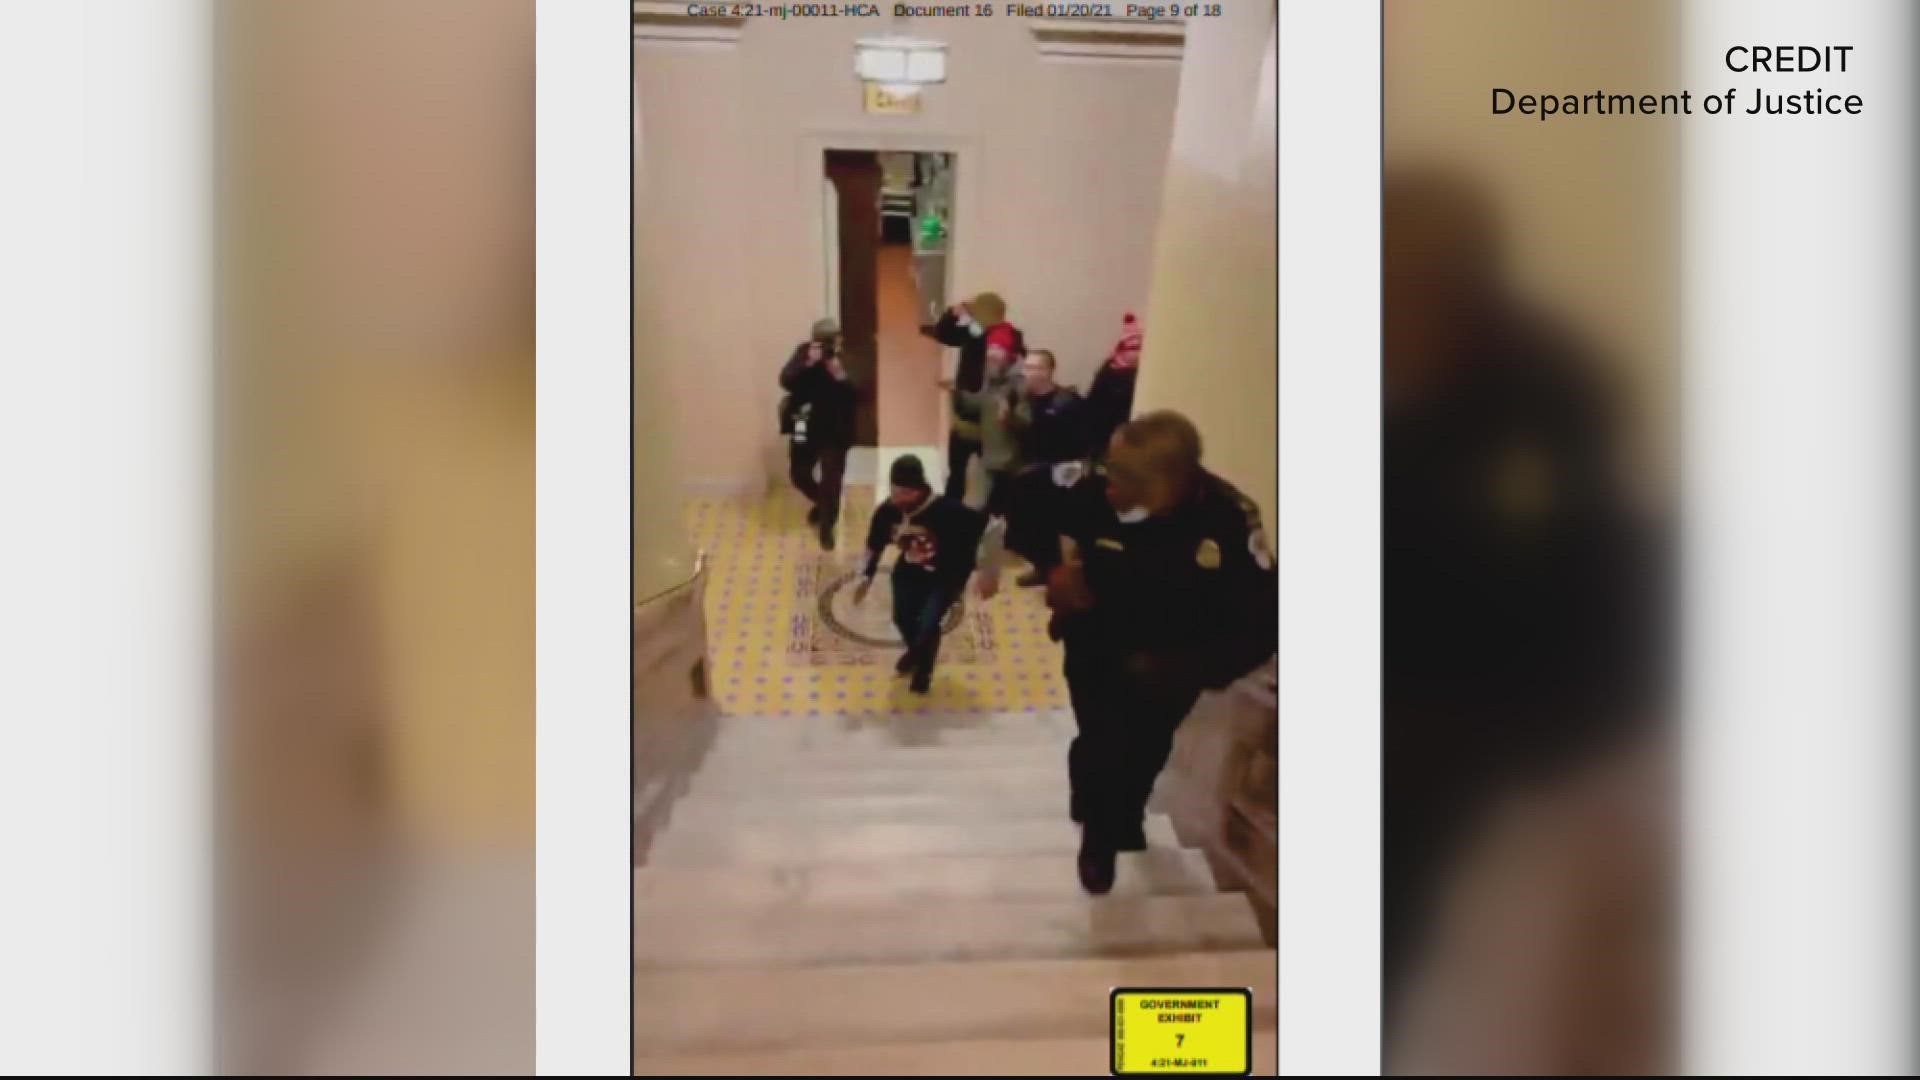 A jury found the Capitol Rioter who chased Capitol Police Officer through the building on January 6th - guilty.